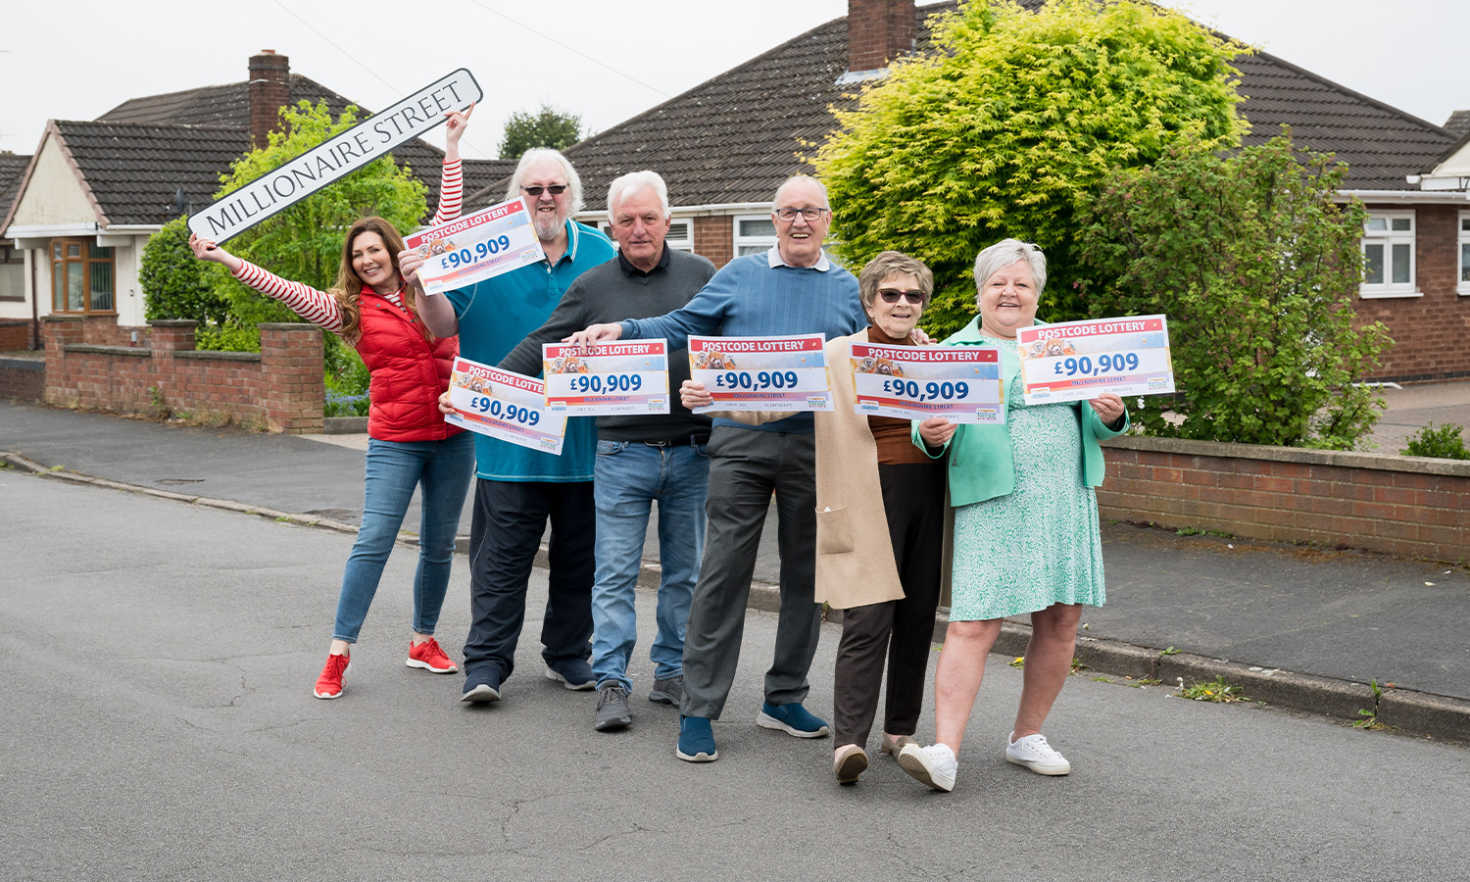 Doing the wonga conga - today's Millionaire Street prizes have landed in Scunthorpe!